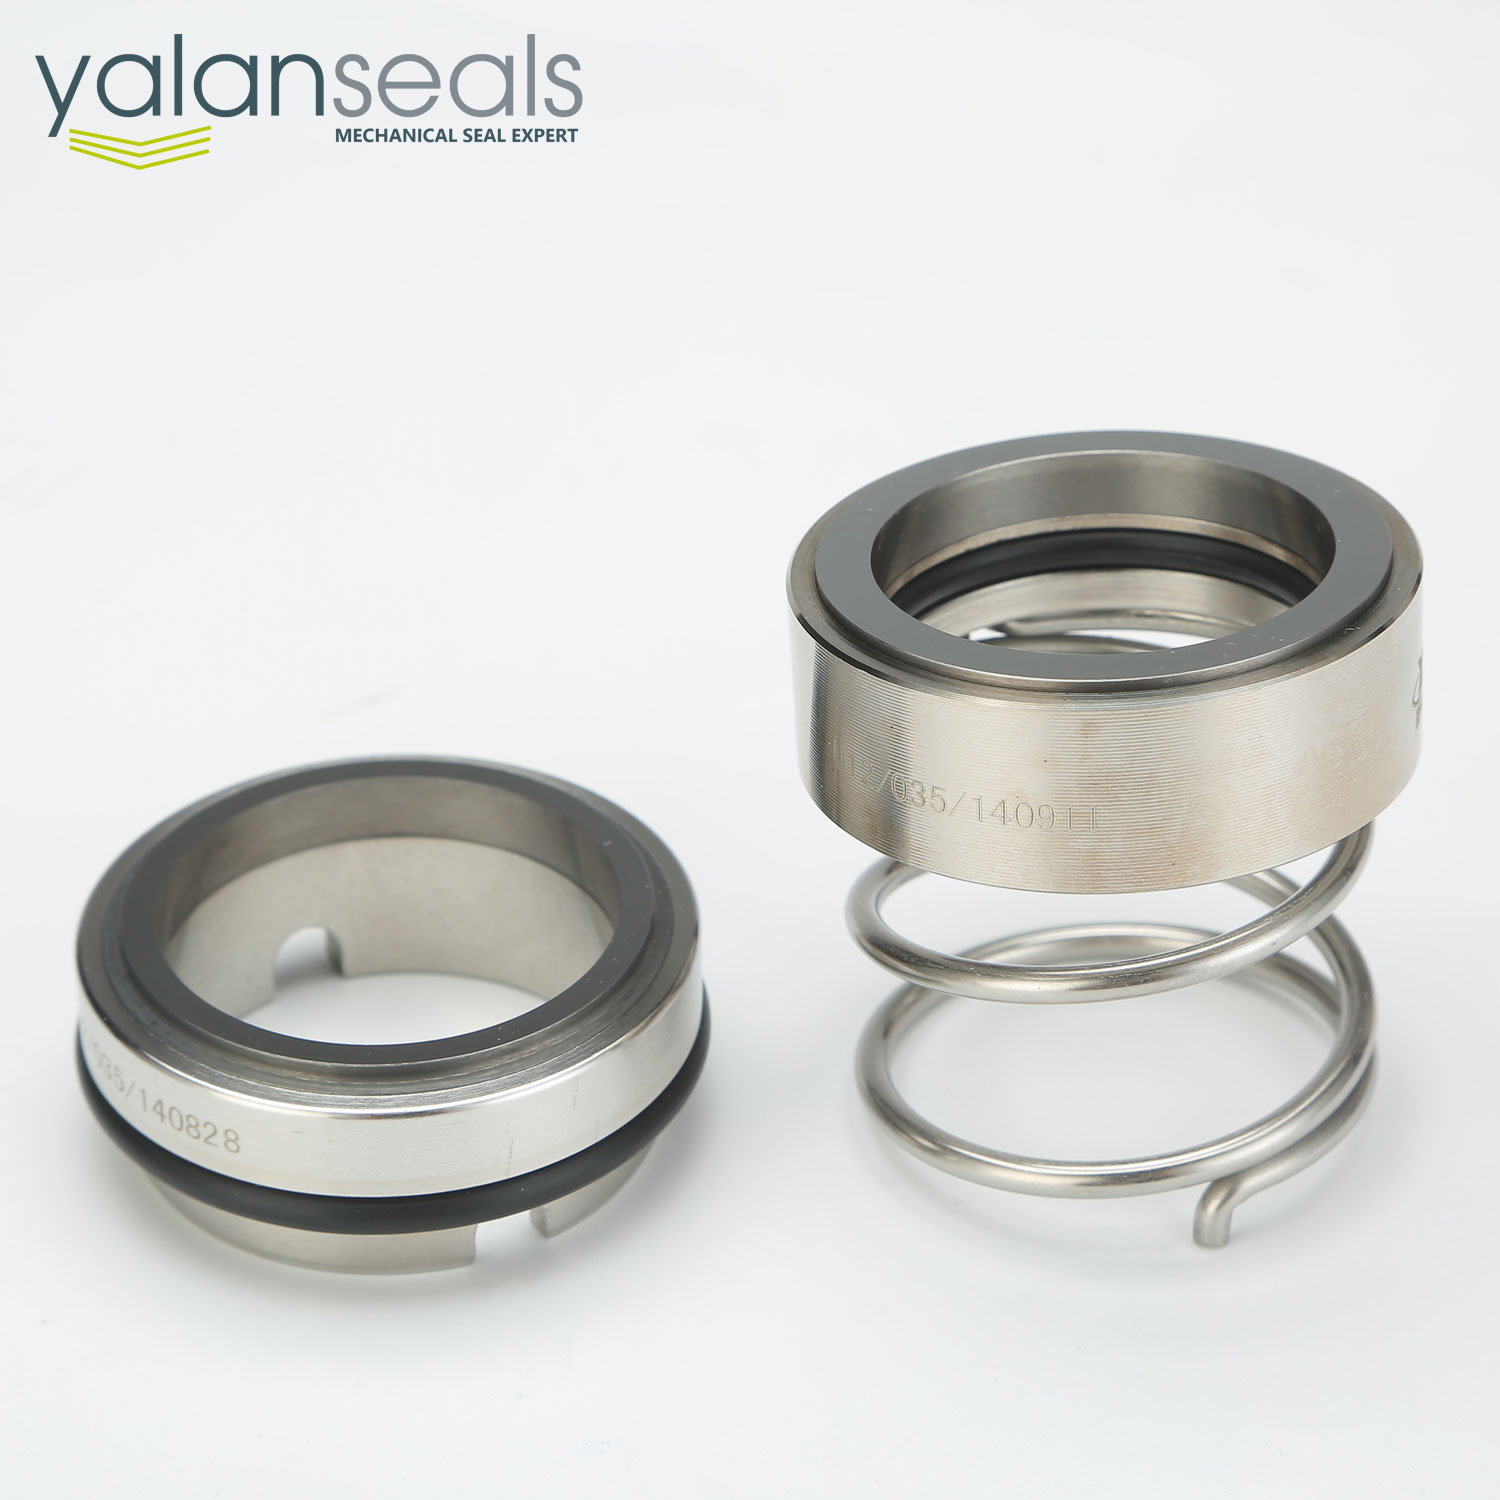 YALAN U120 Single Spring Mechanical Seal for Centrifugal Pumps, Clean Water Pumps, Sewage Pumps and Chemical Pumps